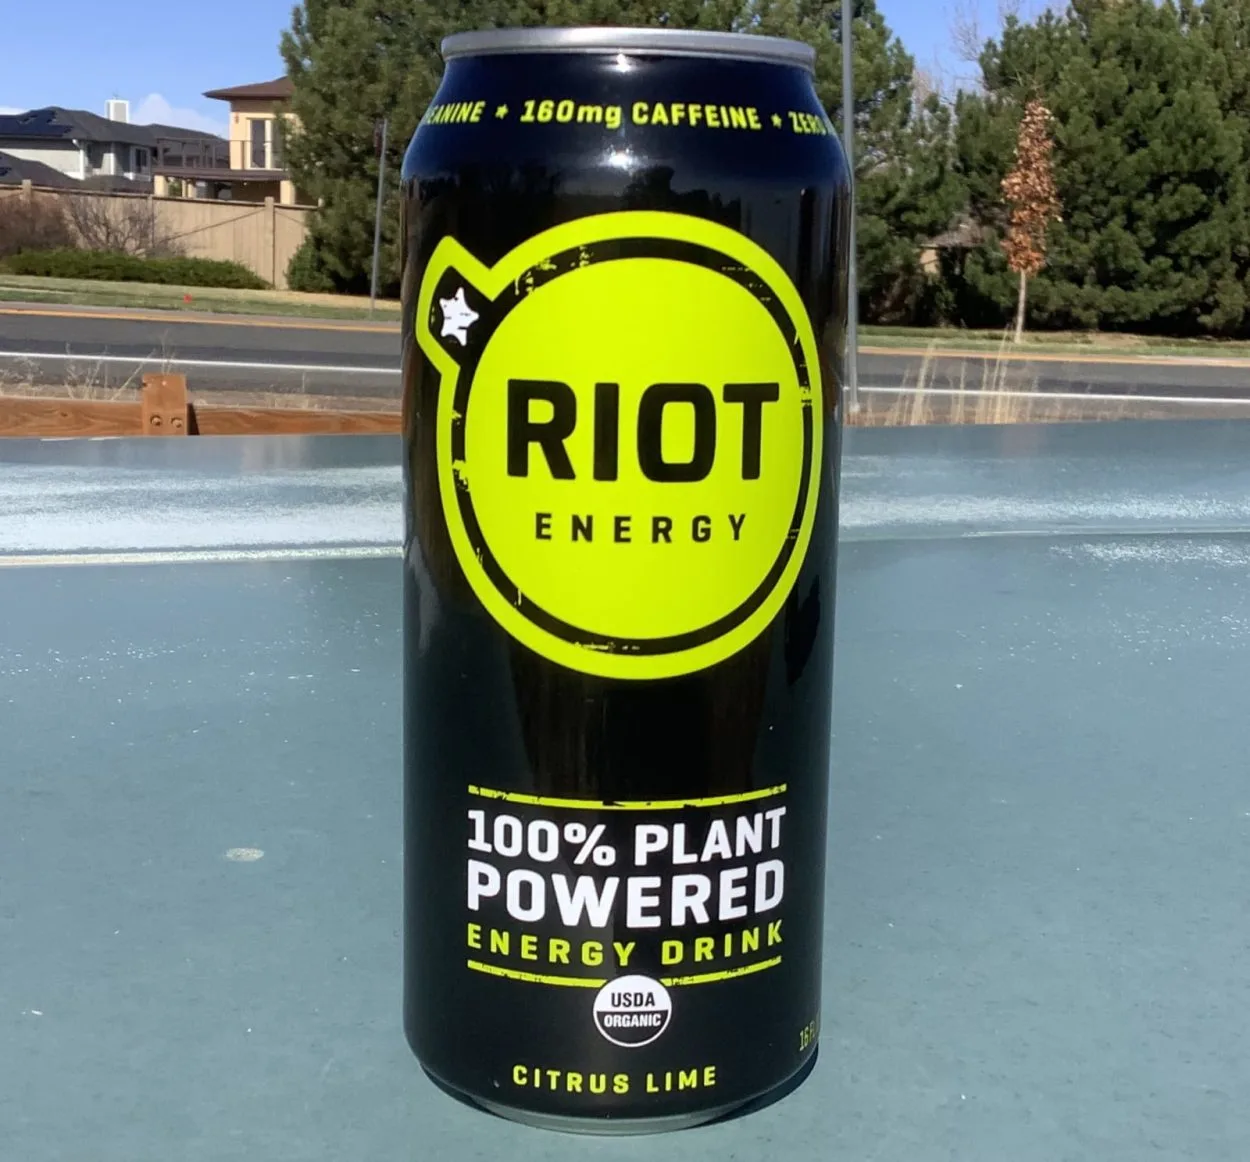 A can of Riot in Citrus Lime flavor